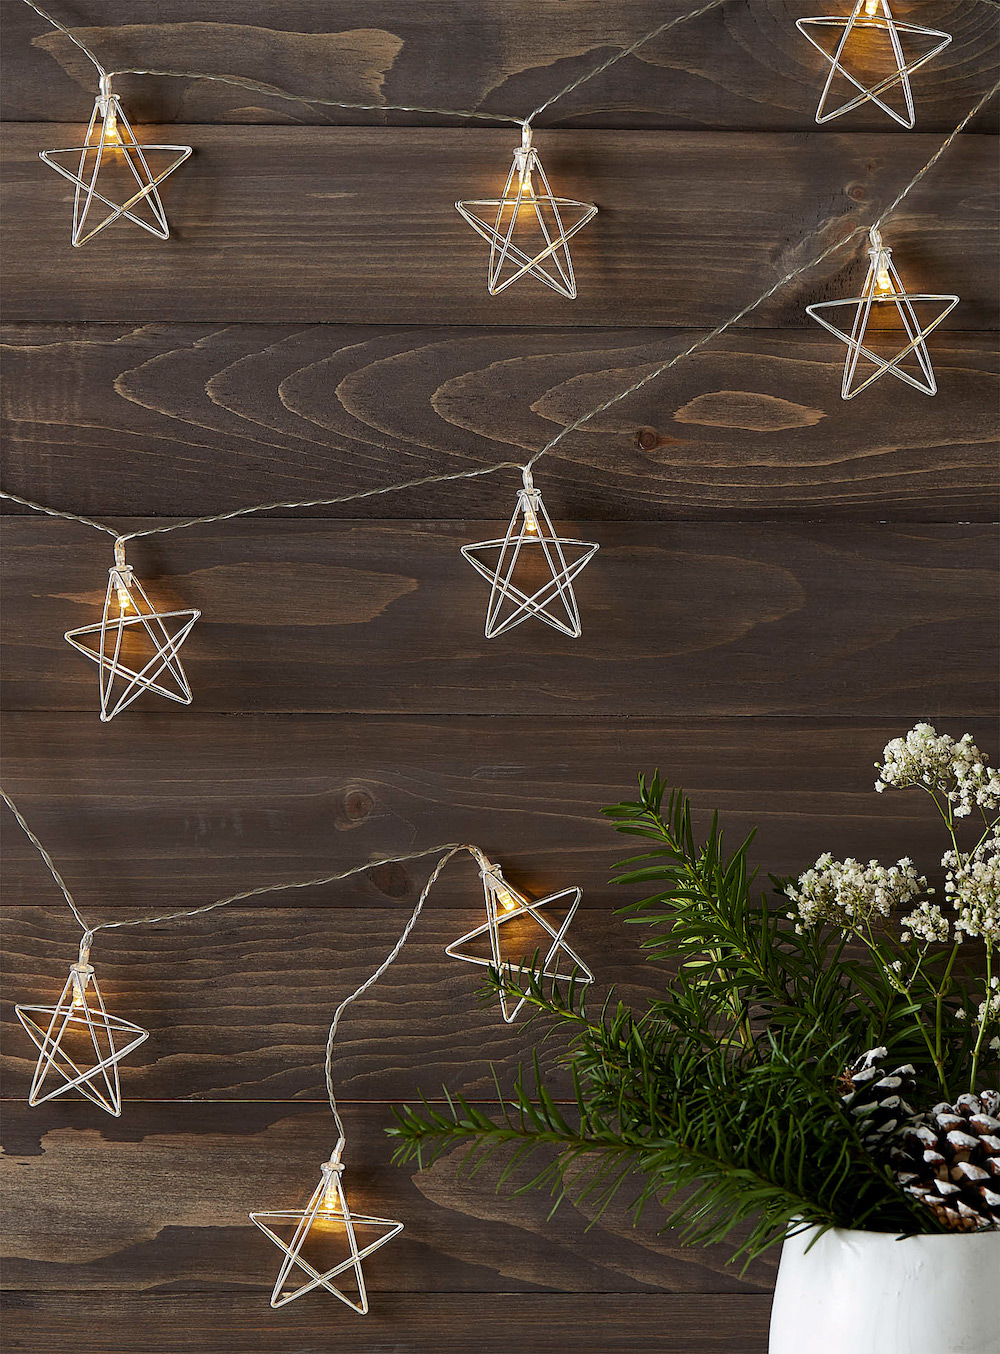 Silver star string lights from Simons hanging on a wood board wall with a white vase filled fir branches, pinecones and white flowers